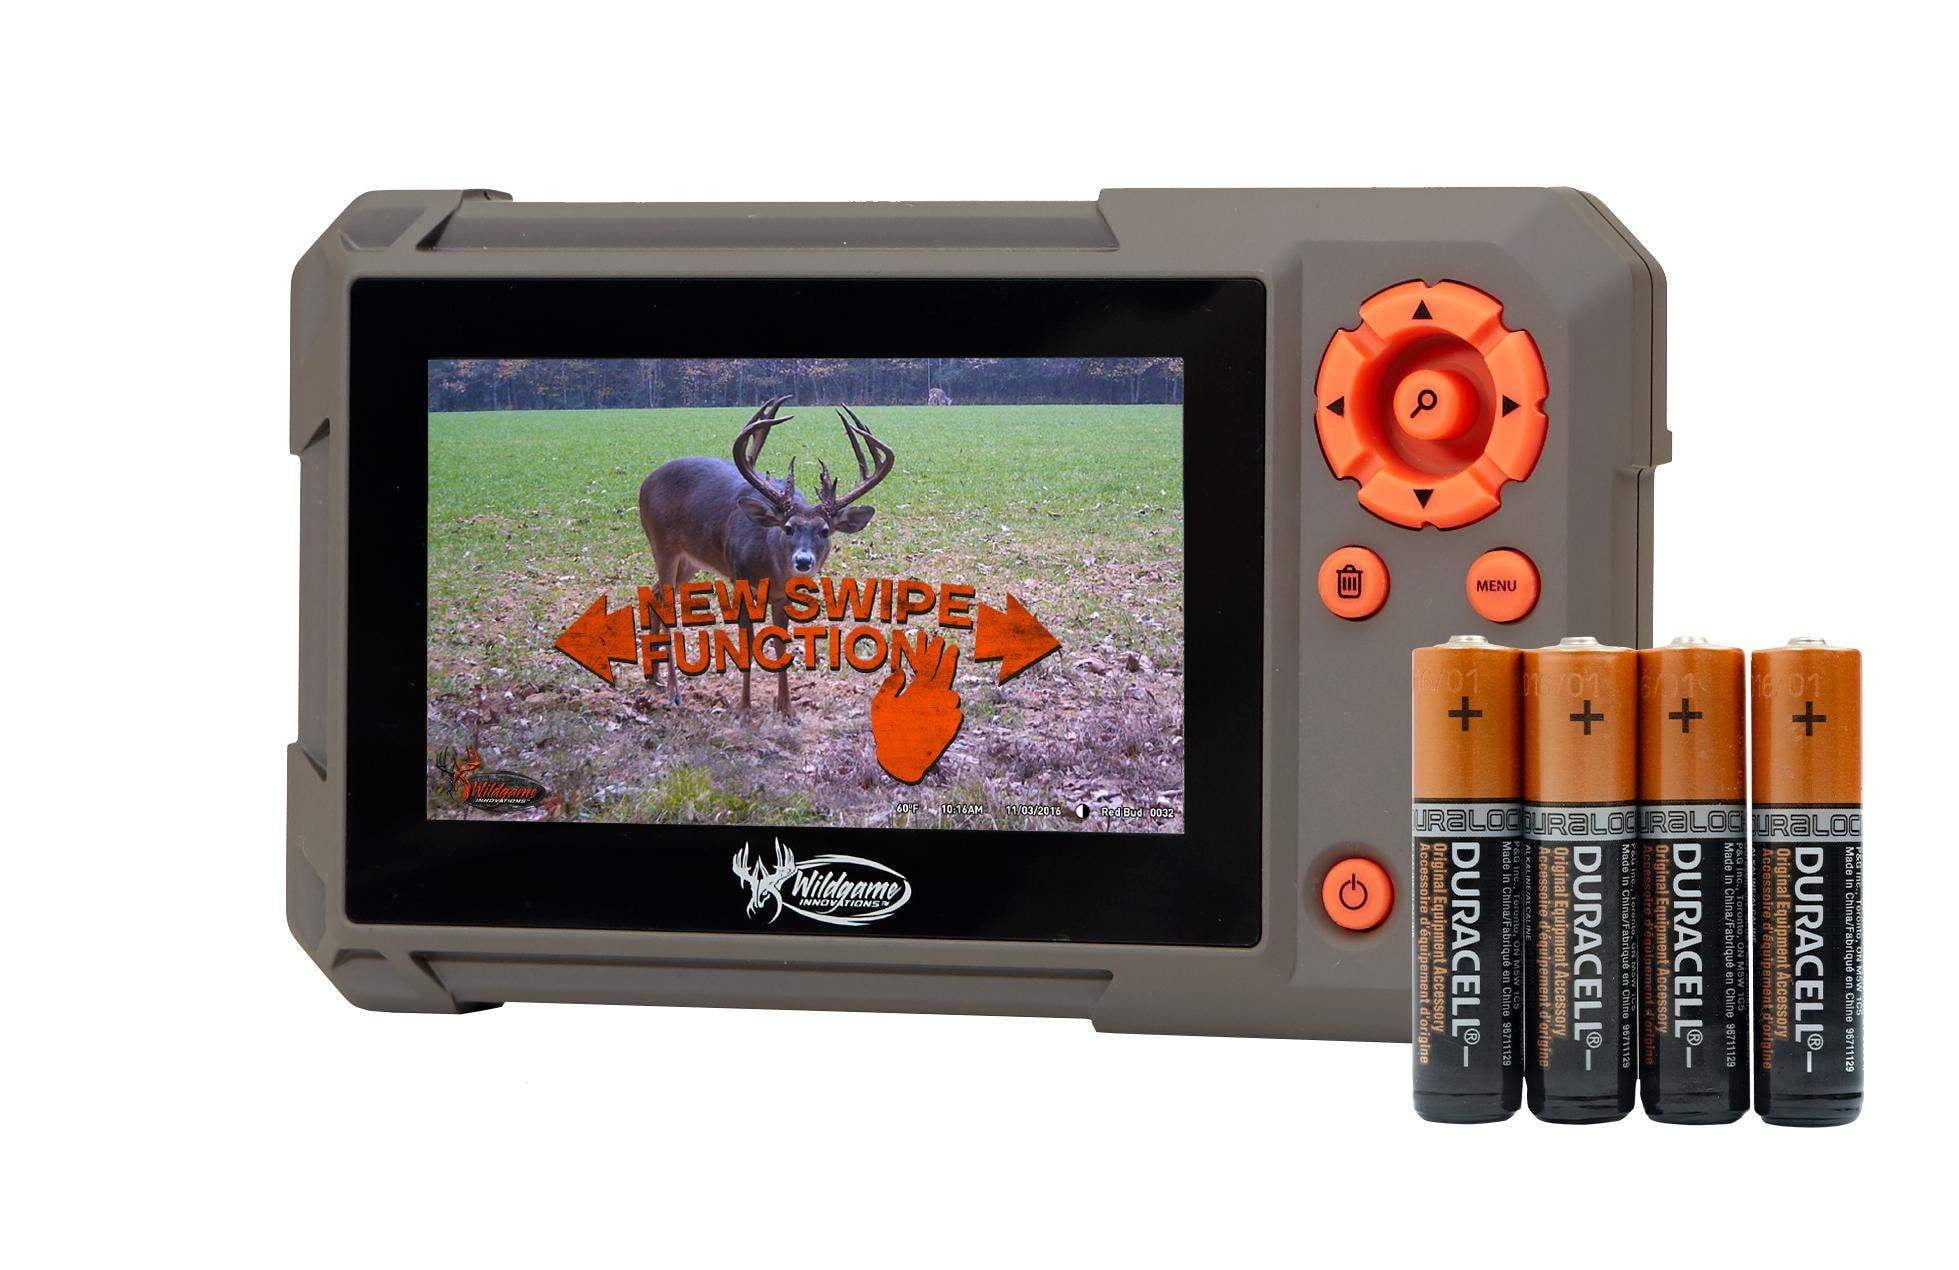 Wildgame Terra Extreme Lightsout 18MP 60ft WGICM0724 Trail Camera - - New! 